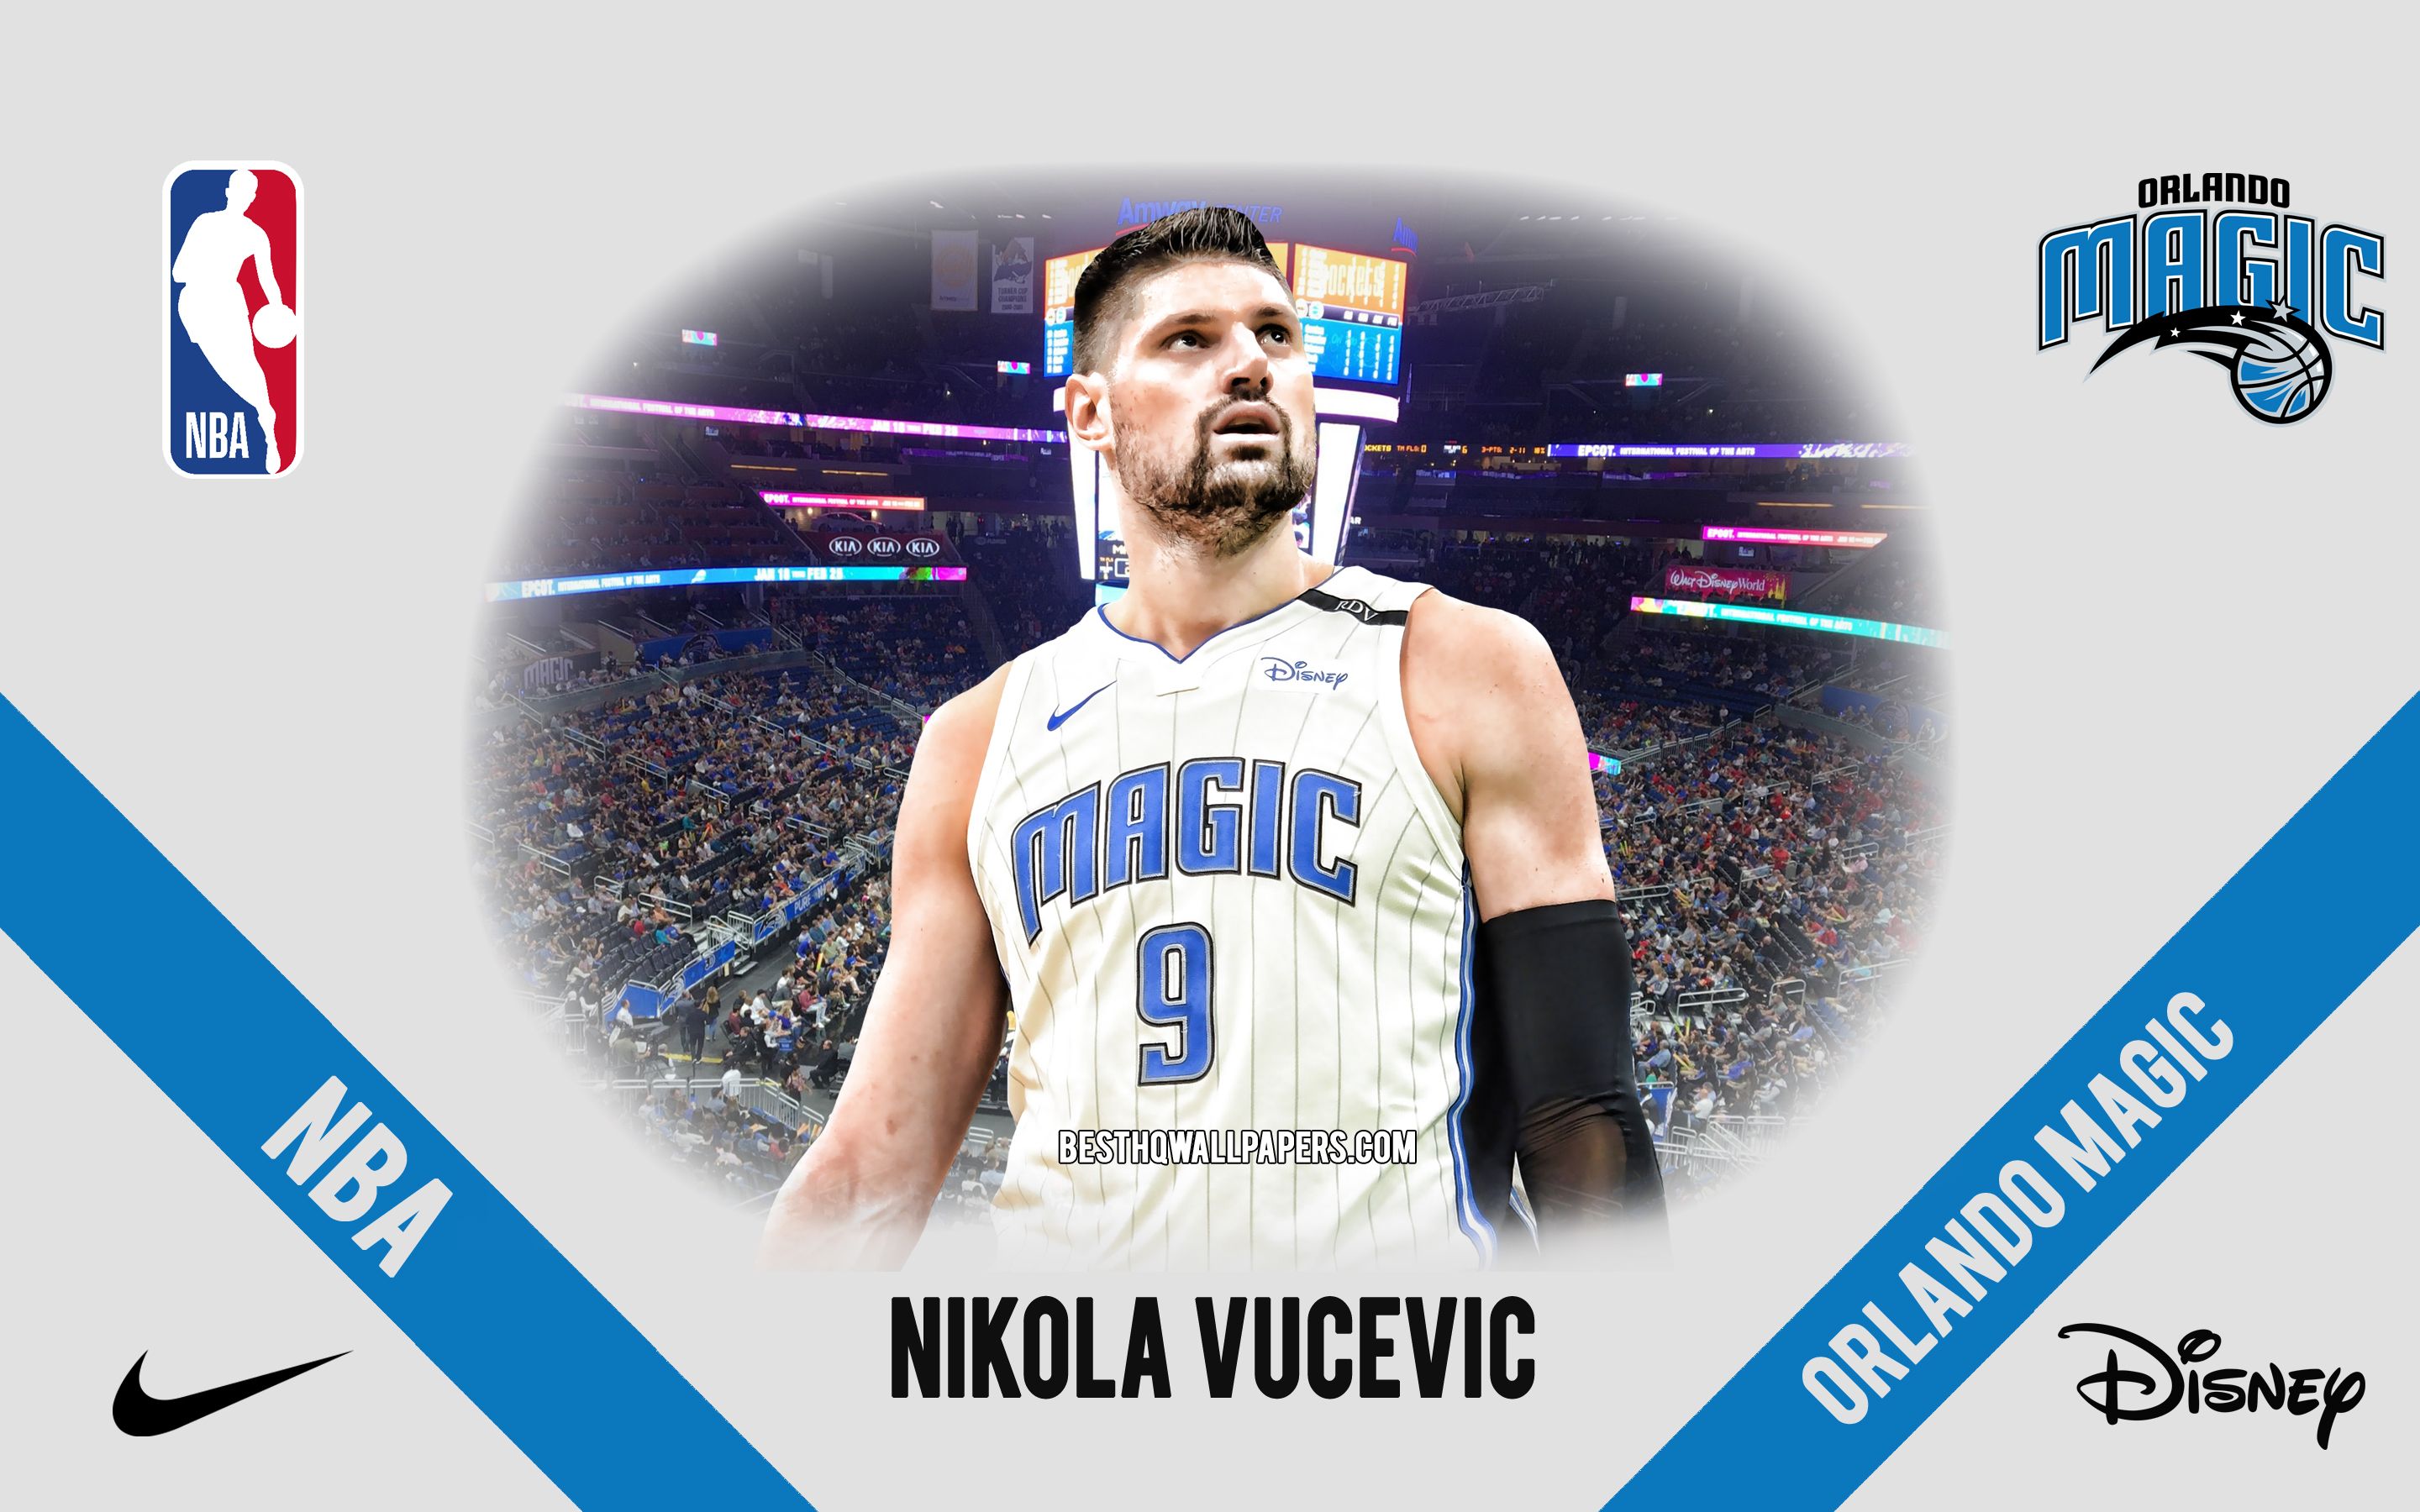 Download wallpaper Nikola Vucevic, Orlando Magic, Montenegrin Basketball Player, NBA, portrait, USA, basketball, Amway Center, Orlando Magic logo for desktop with resolution 2880x1800. High Quality HD picture wallpaper